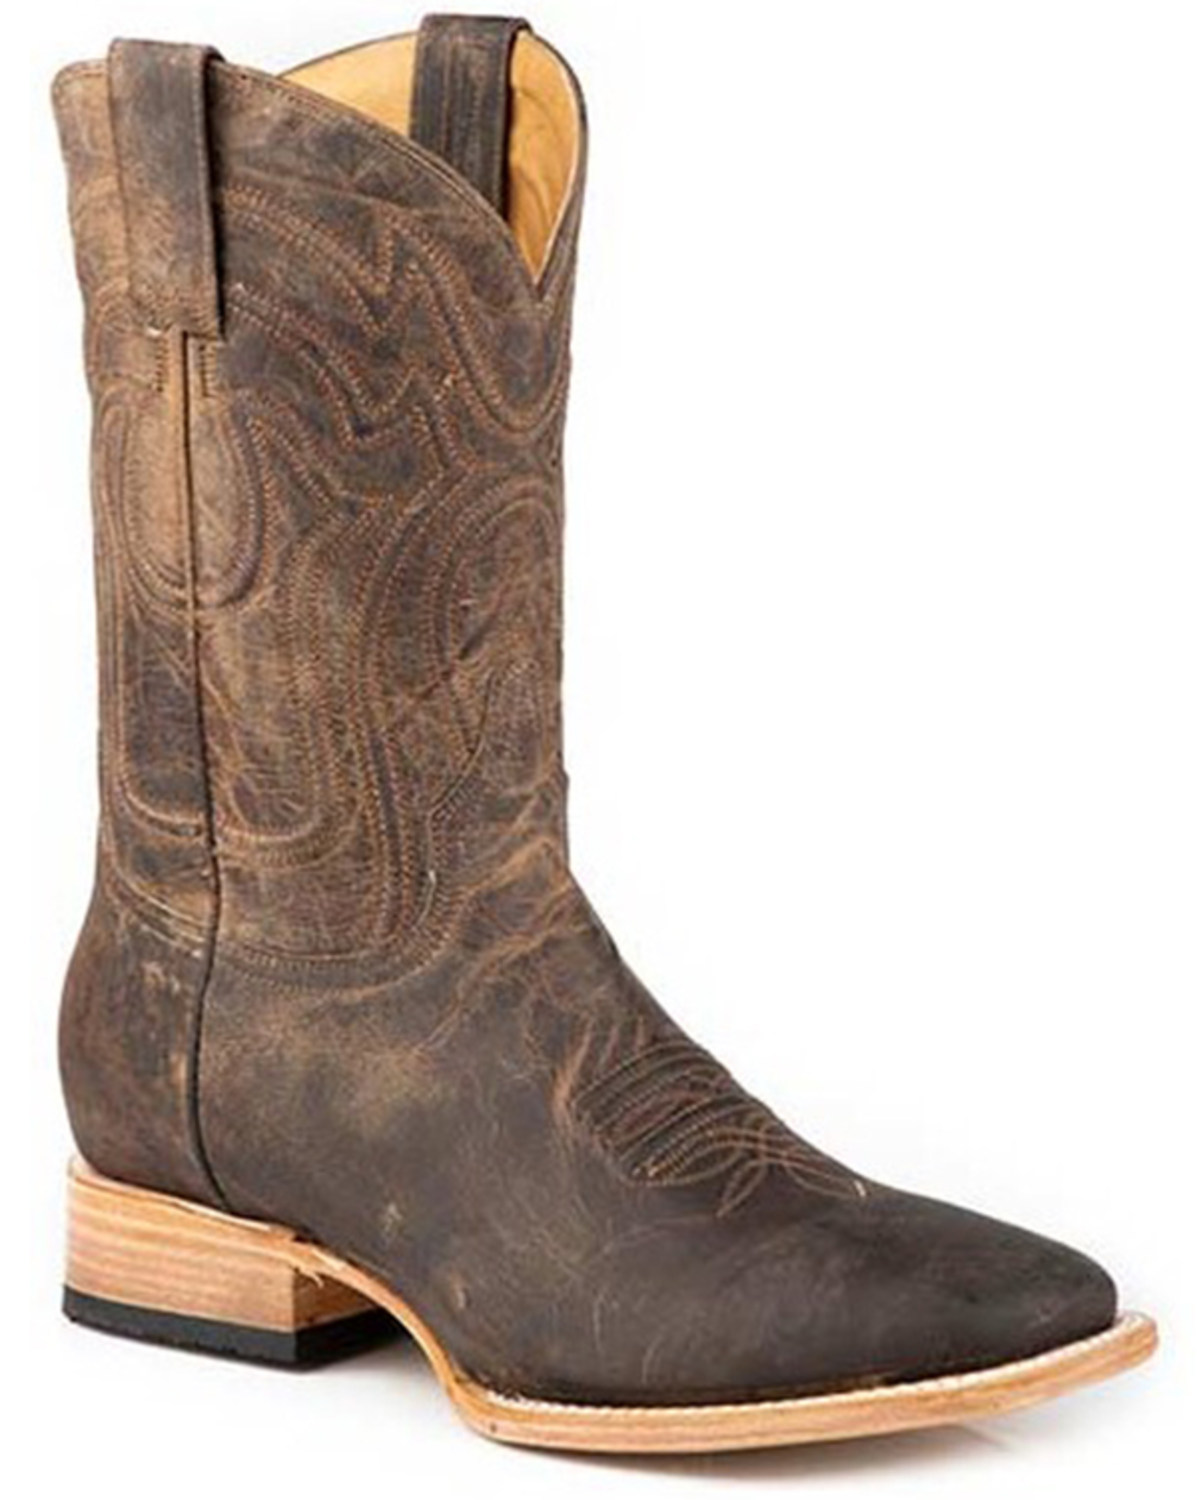 Stetson Men's Roughstock Western Boots - Broad Square Toe